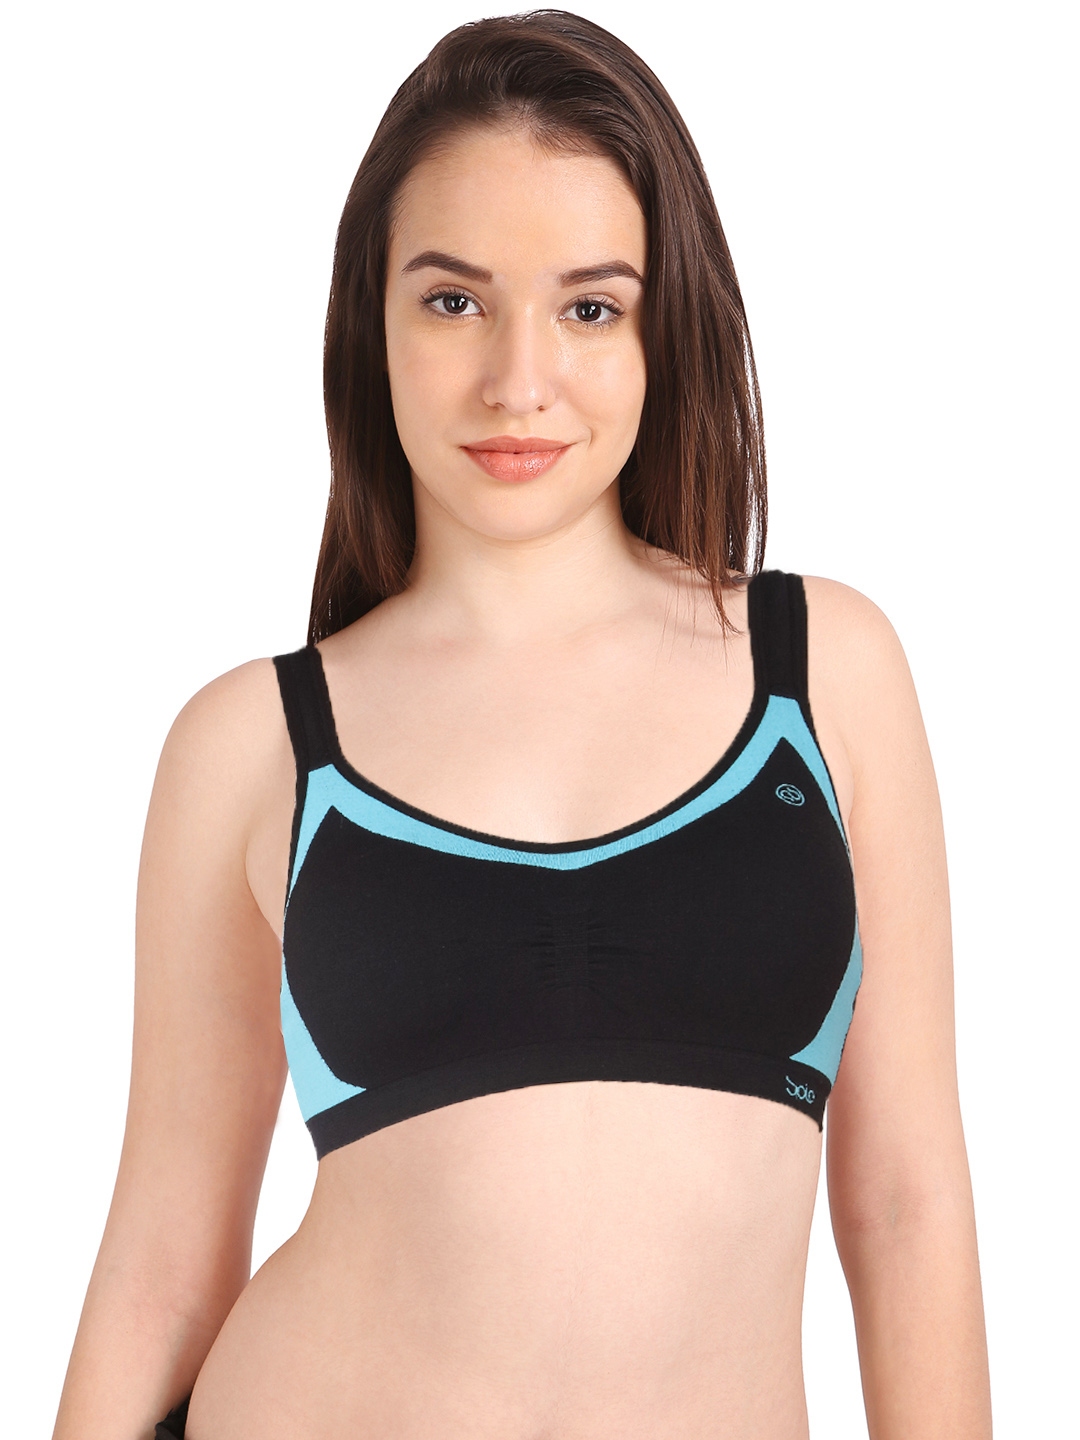 Buy SOIE Women's Full Coverage High Impact Padded Non-Wired Sports